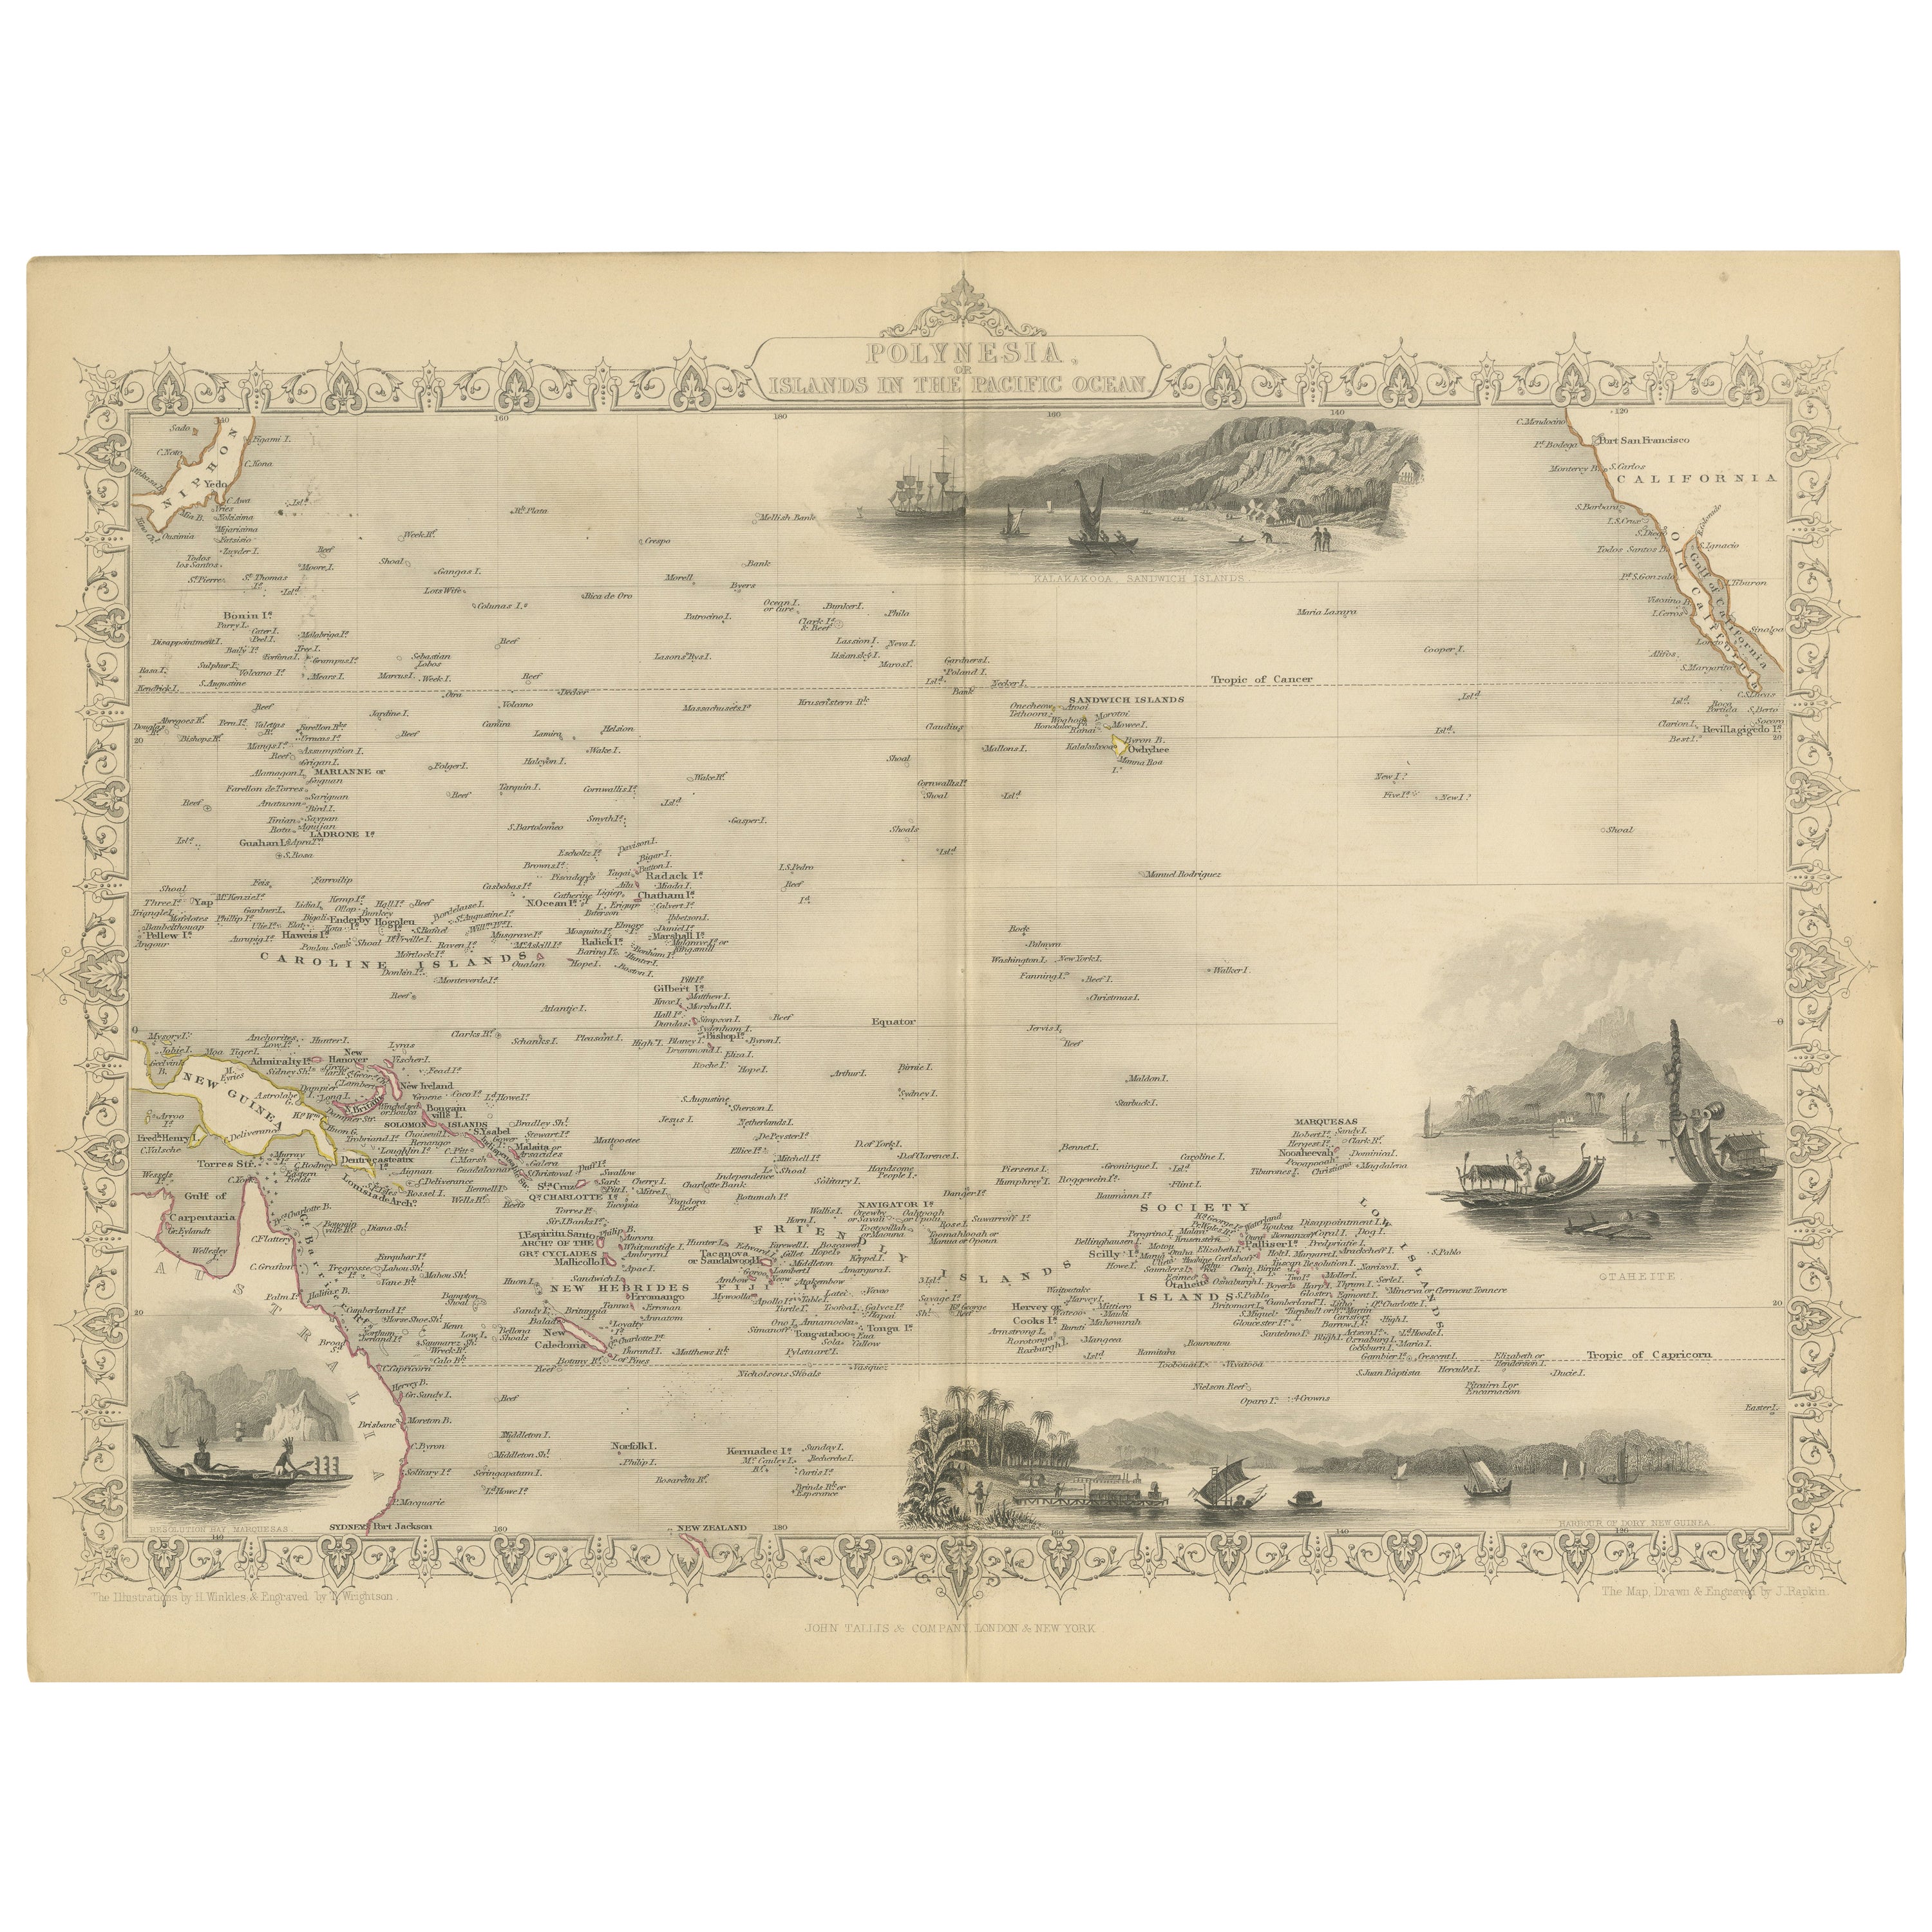 Map of Polynesia Highlighting Cultural Landscapes and Maritime Activities, 1851